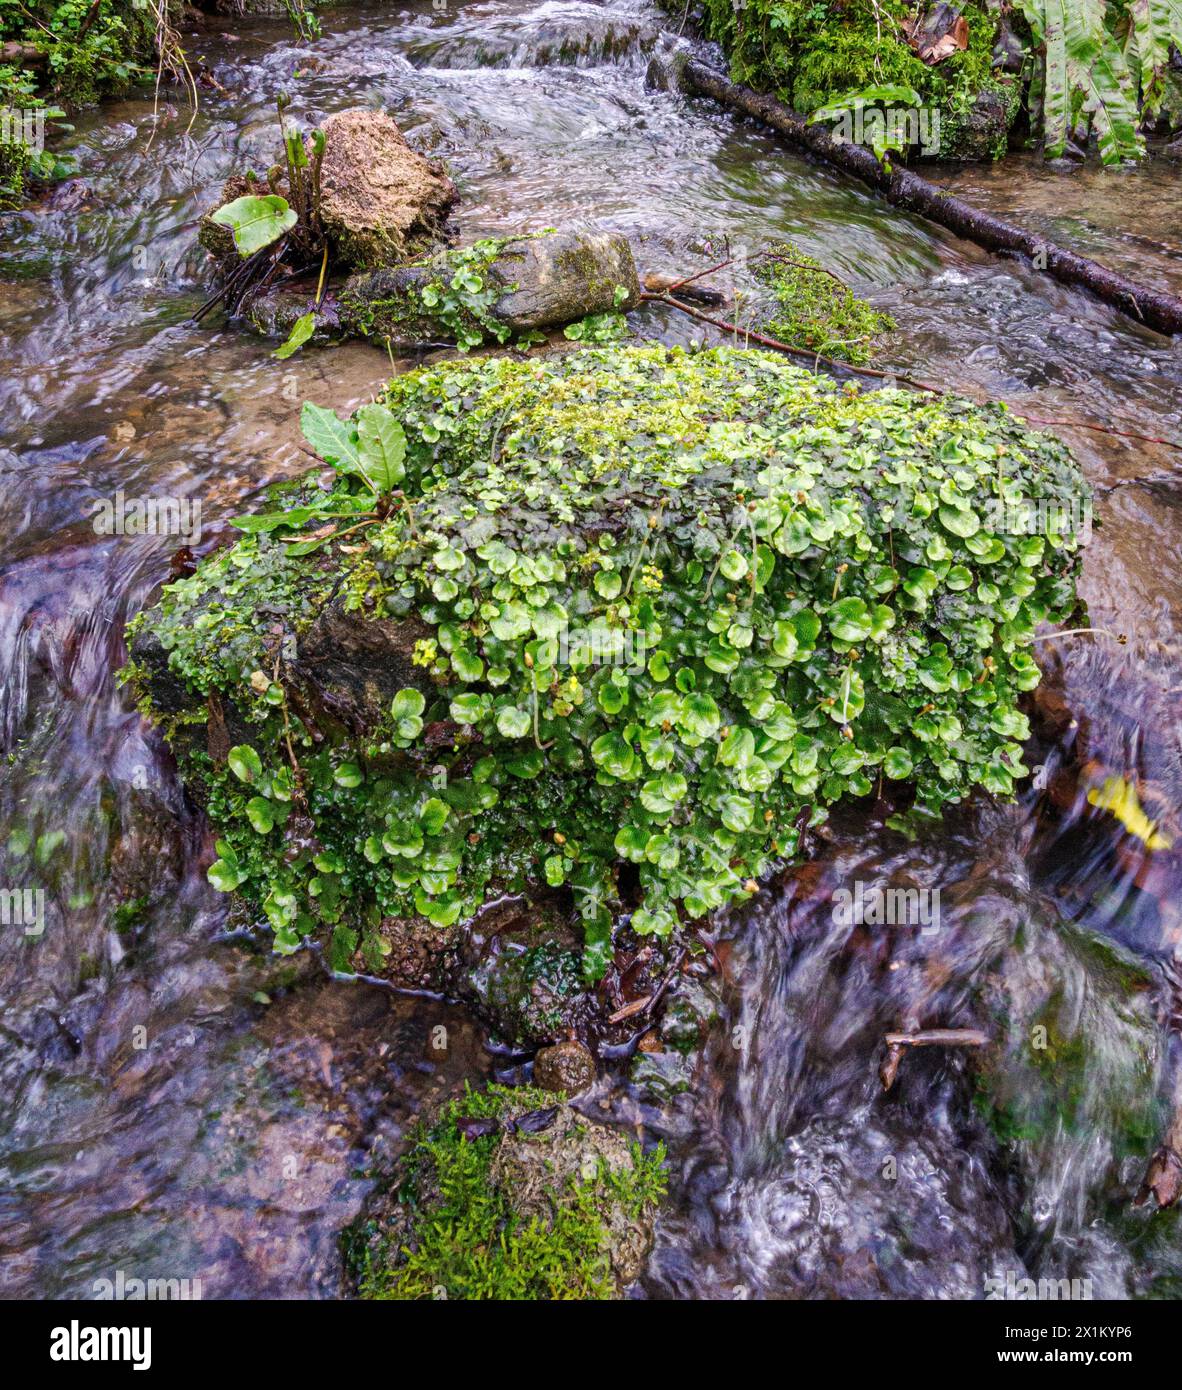 Snakeskin or Great Scented Liverwort Conocephalum conicum with conical sporangia growing on a rock in a Somerset stream UK Stock Photo